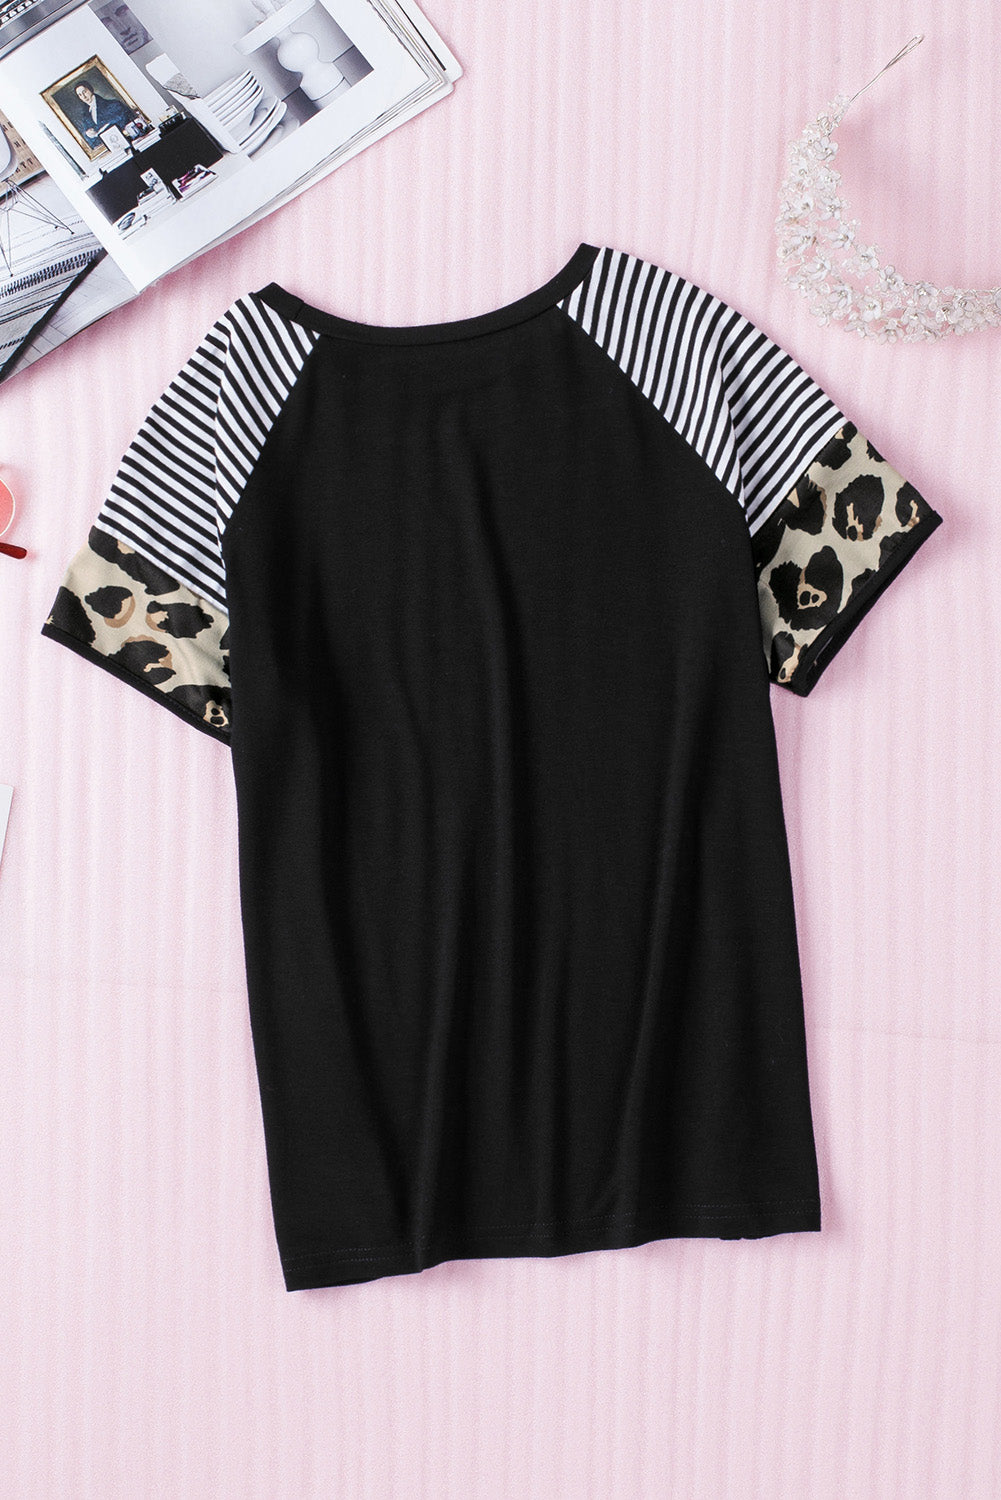 Black Girls’ T-shirt with Striped Leopard Sleeve Family T-shirts JT's Designer Fashion